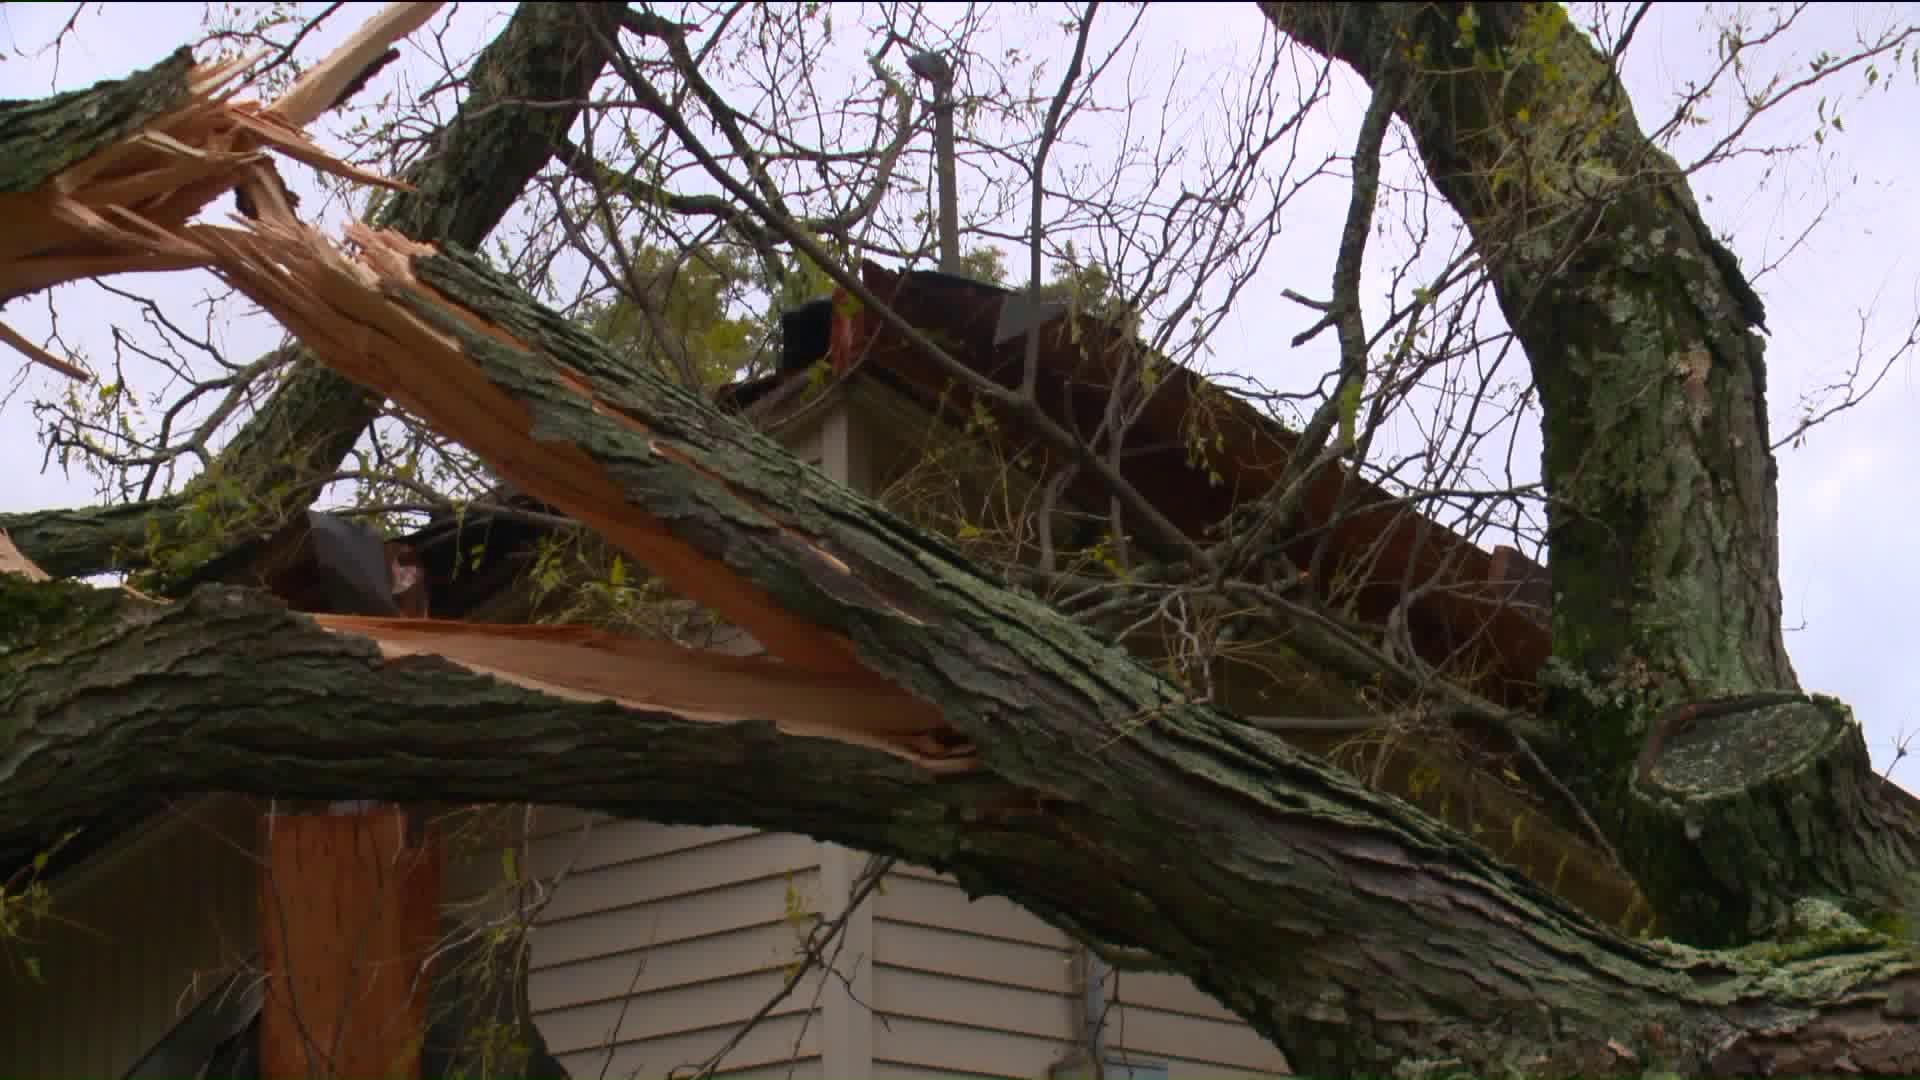 Trail of damage in Vernon